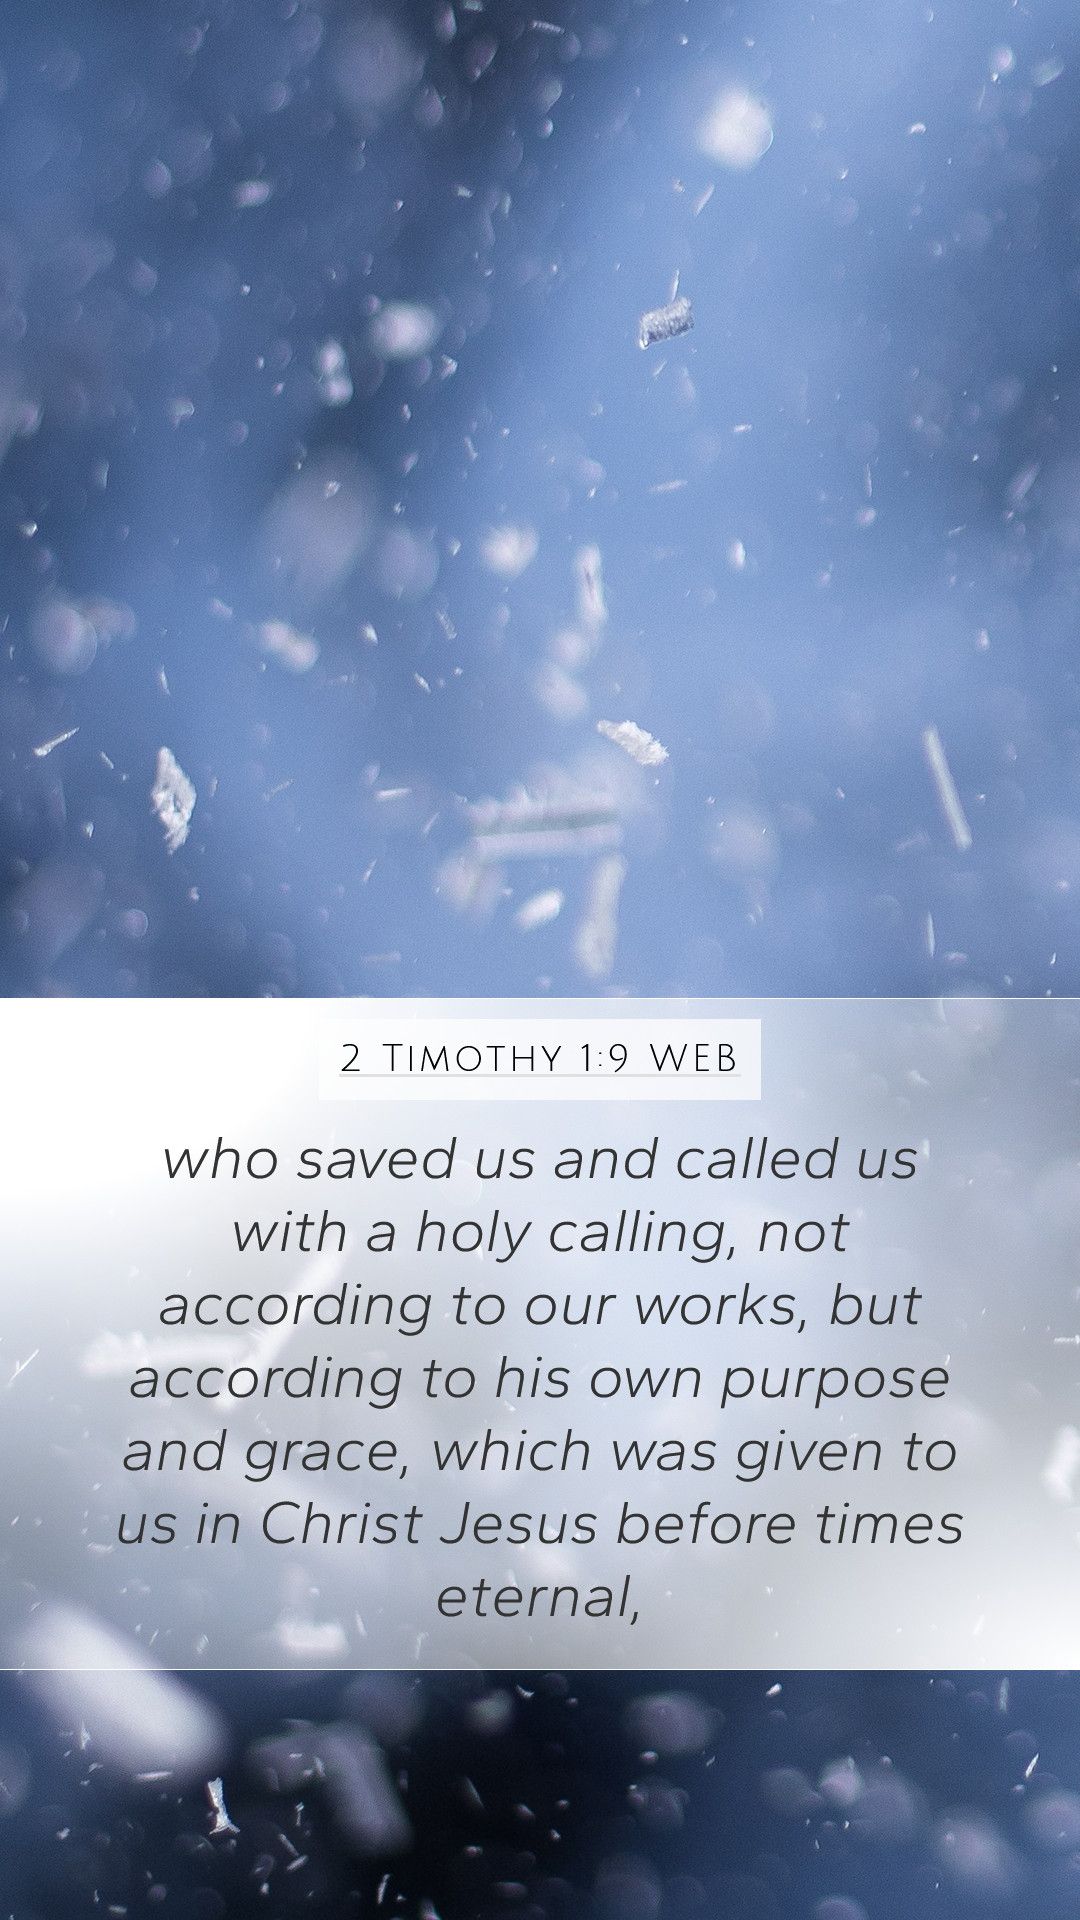  Jesus Christus Hintergrundbild 1080x1920. Timothy 1:9 WEB Mobile Phone Wallpaper saved us and called us with a holy calling